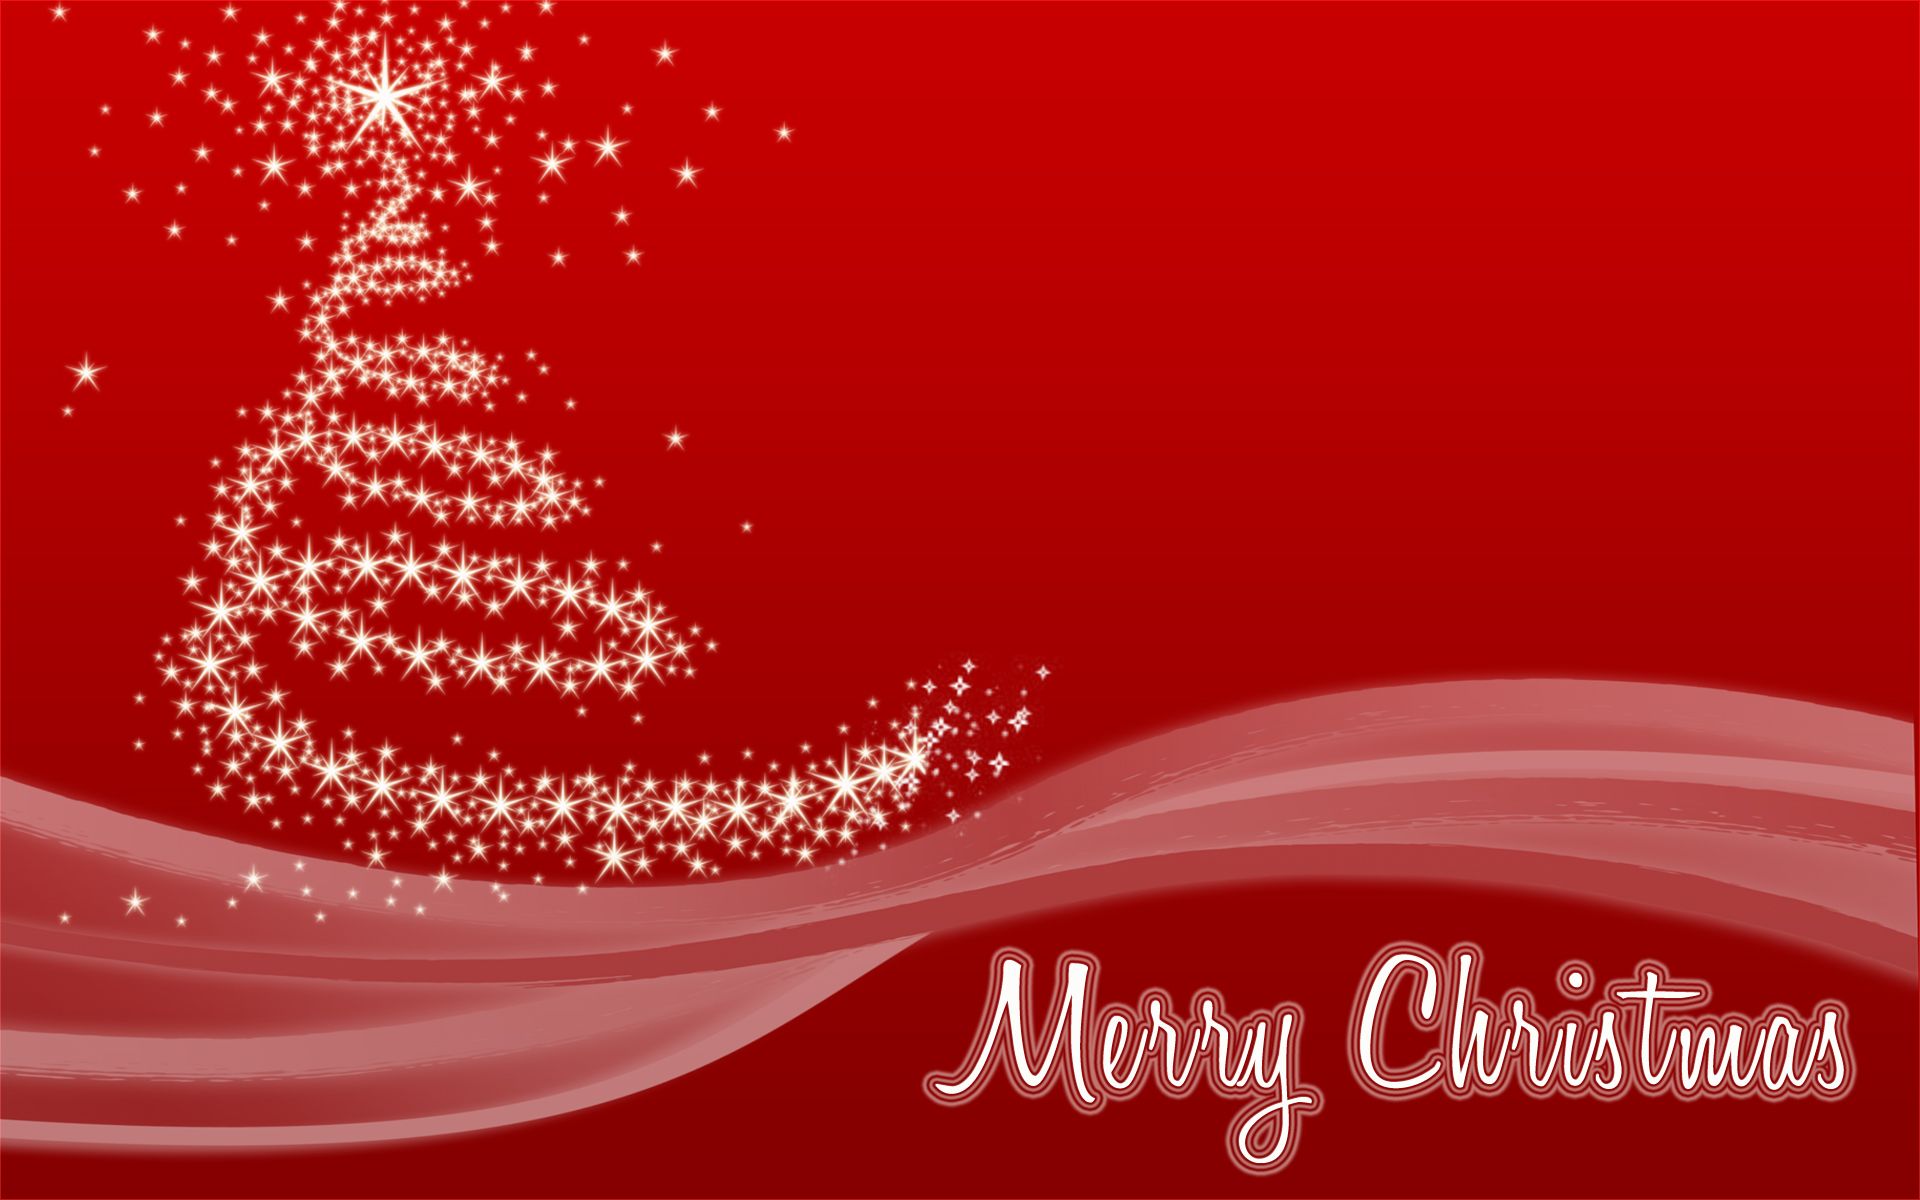 Merry Christmas Tree Wallpaper free download